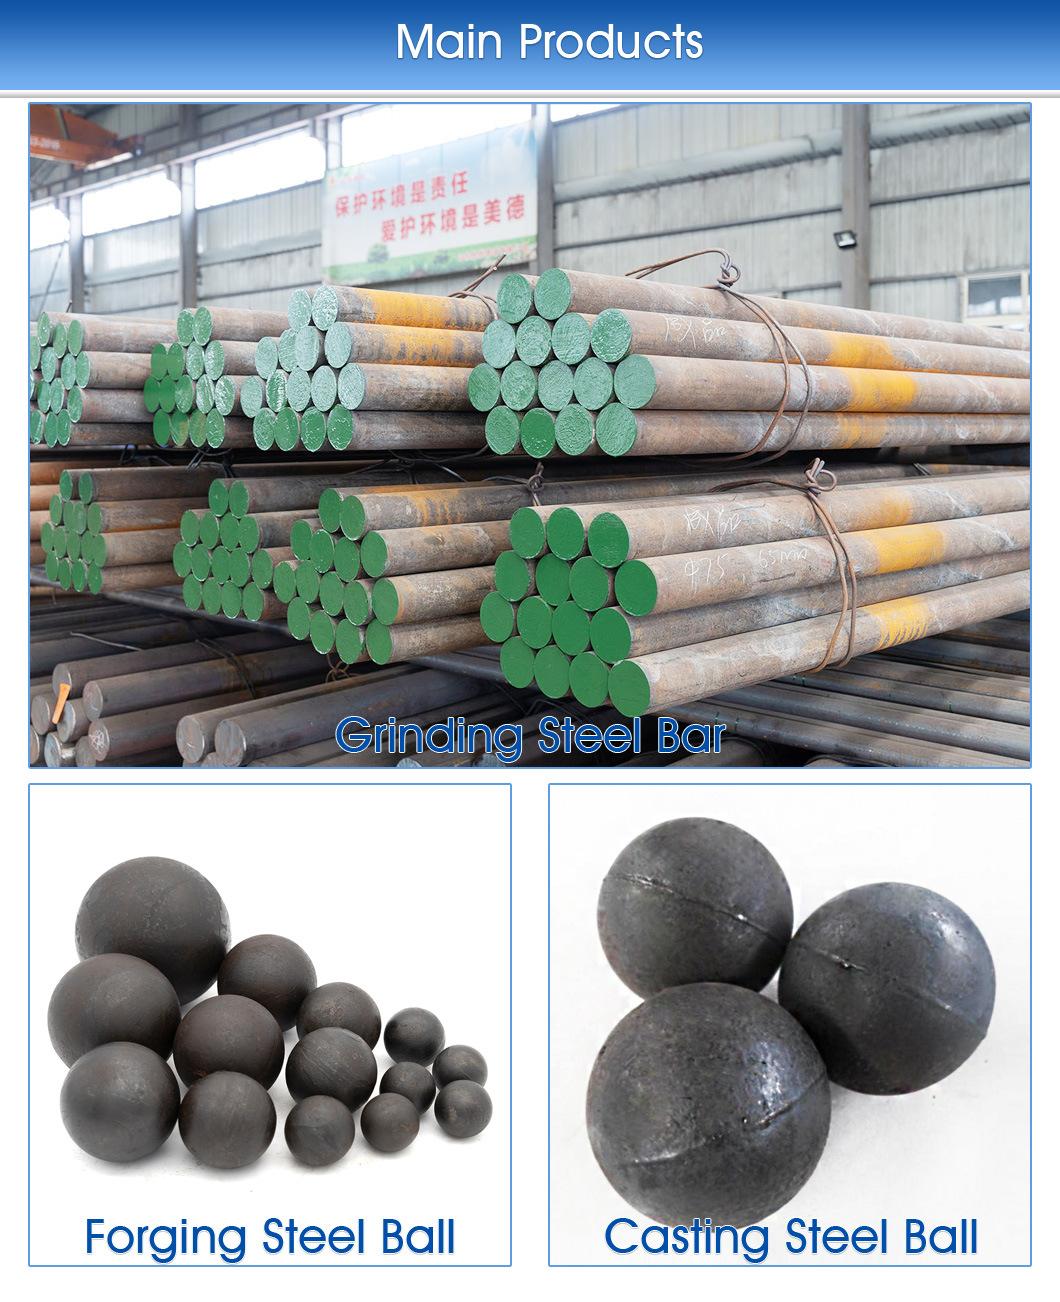 Unbreakable Factory Price Mines Equipment Used in Ball Mill